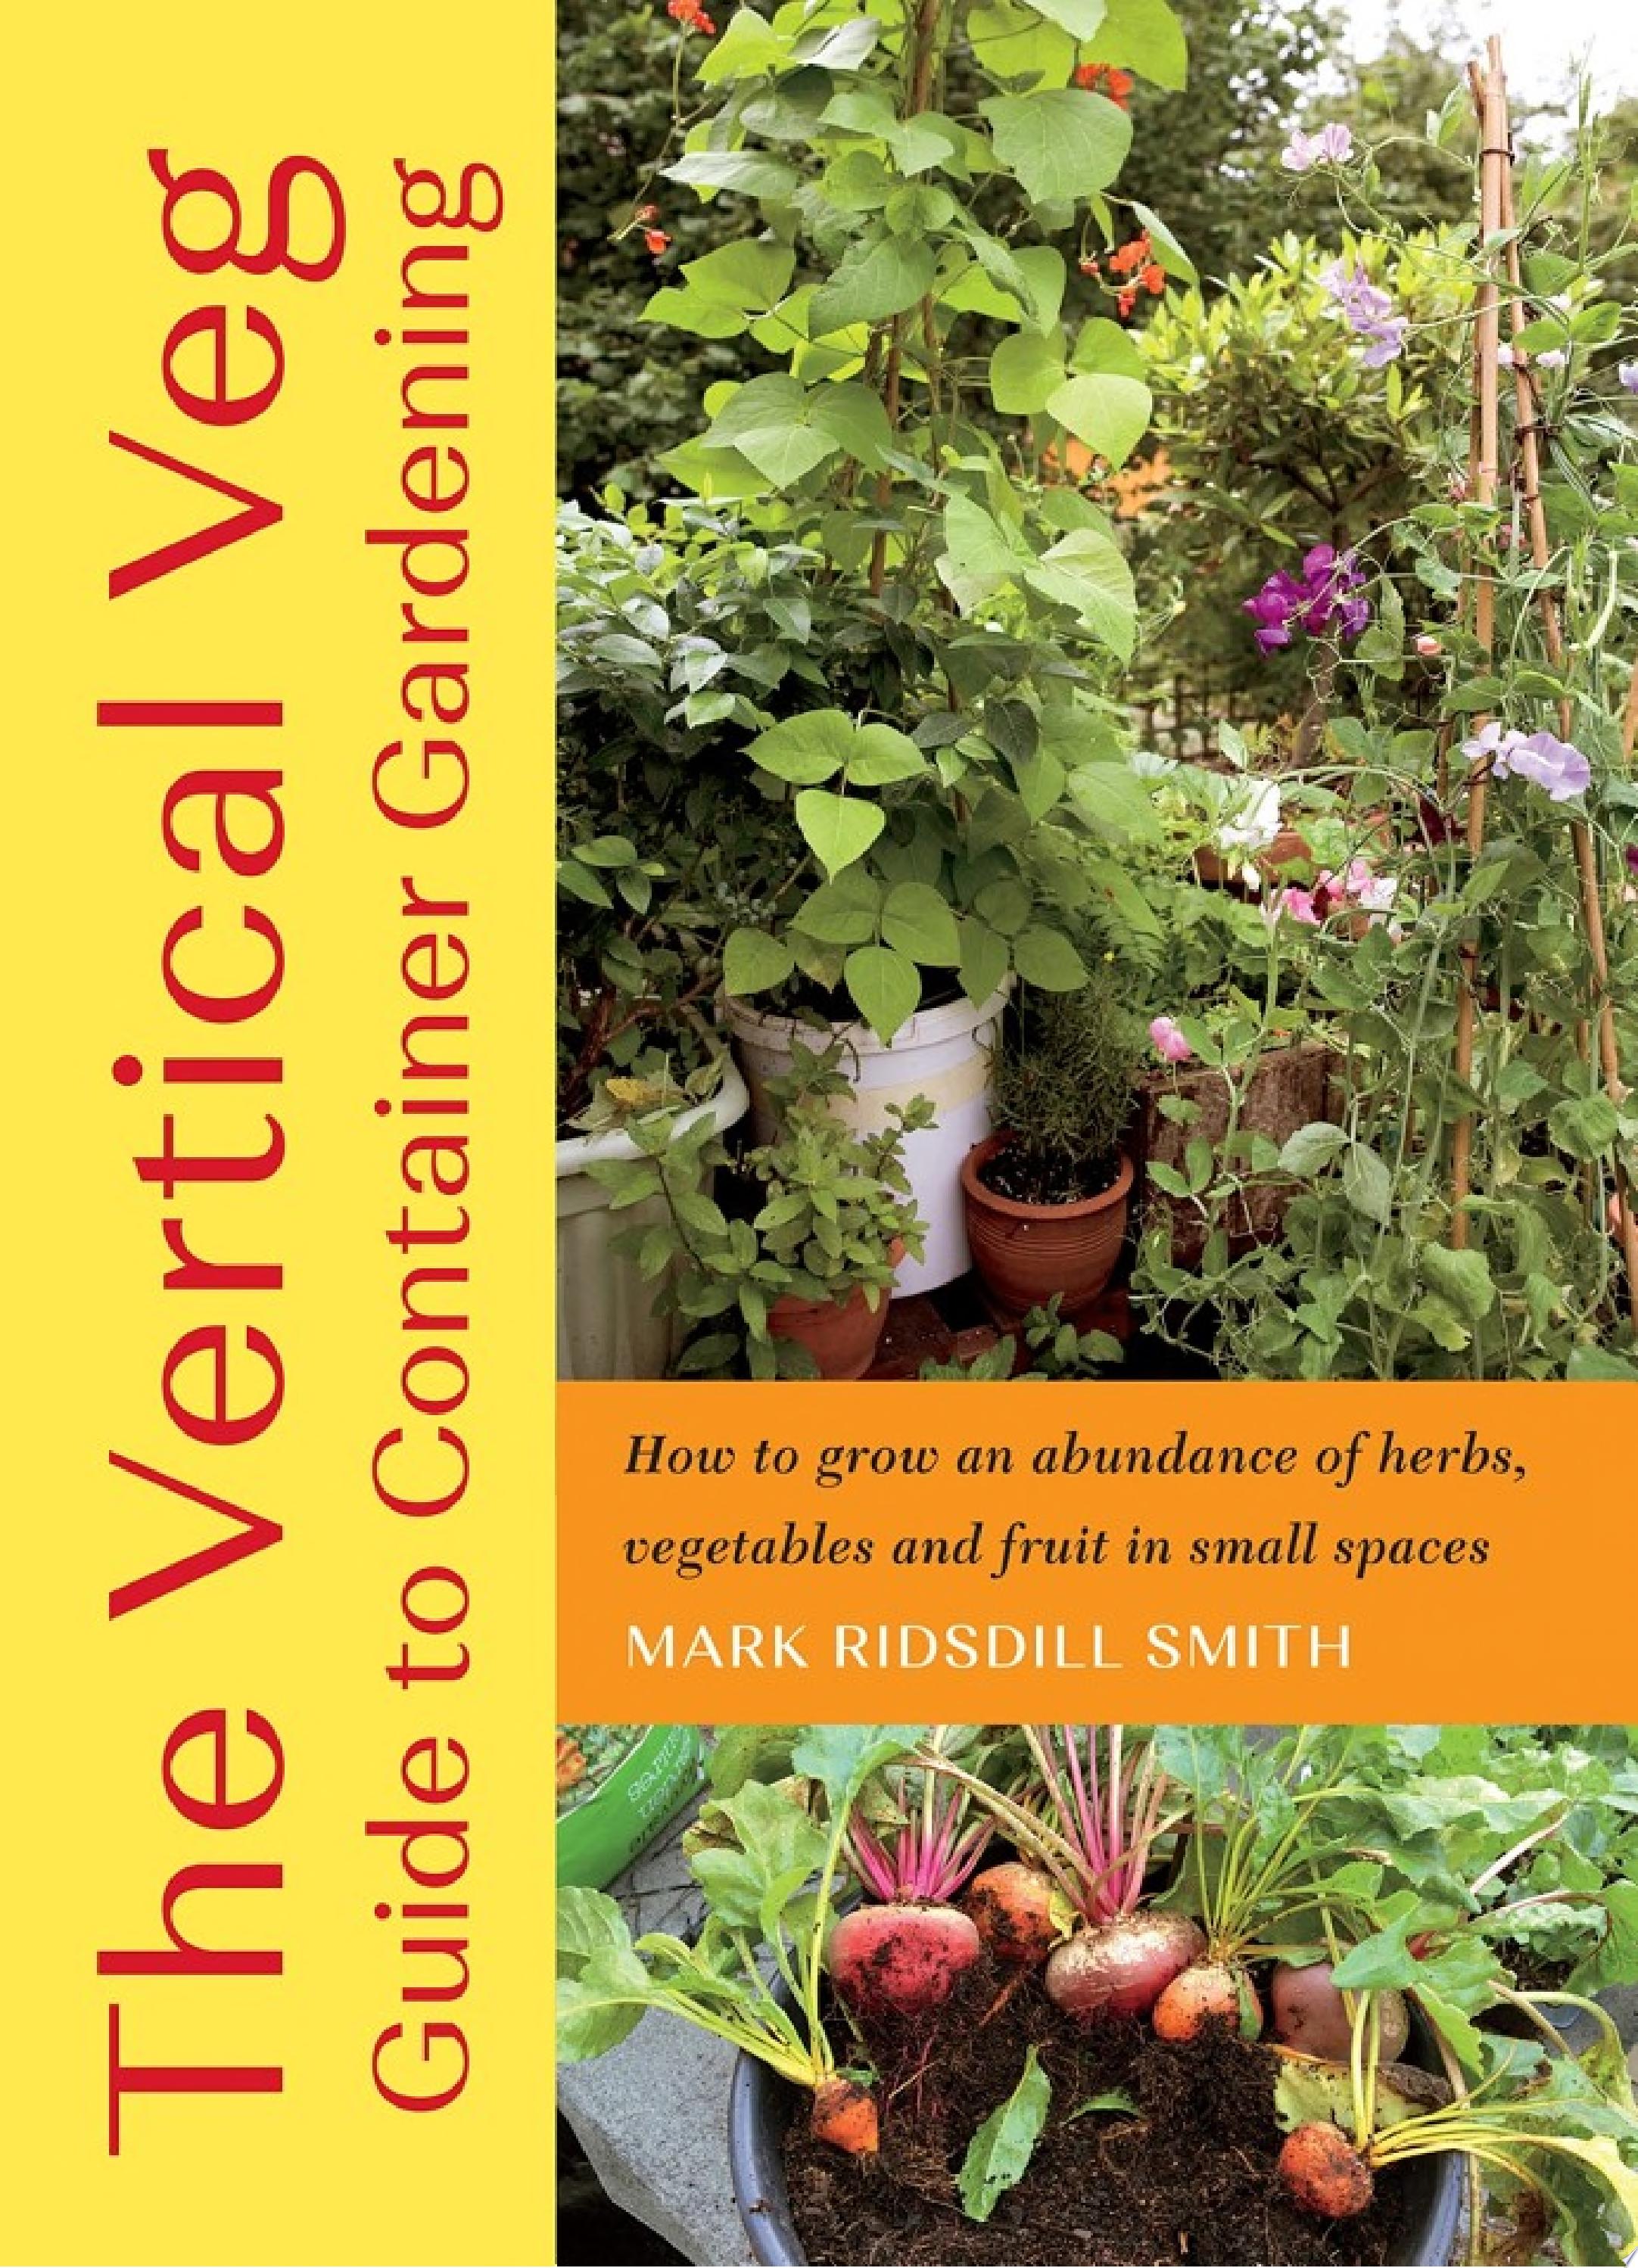 Image for "The Vertical Veg Guide to Container Gardening"